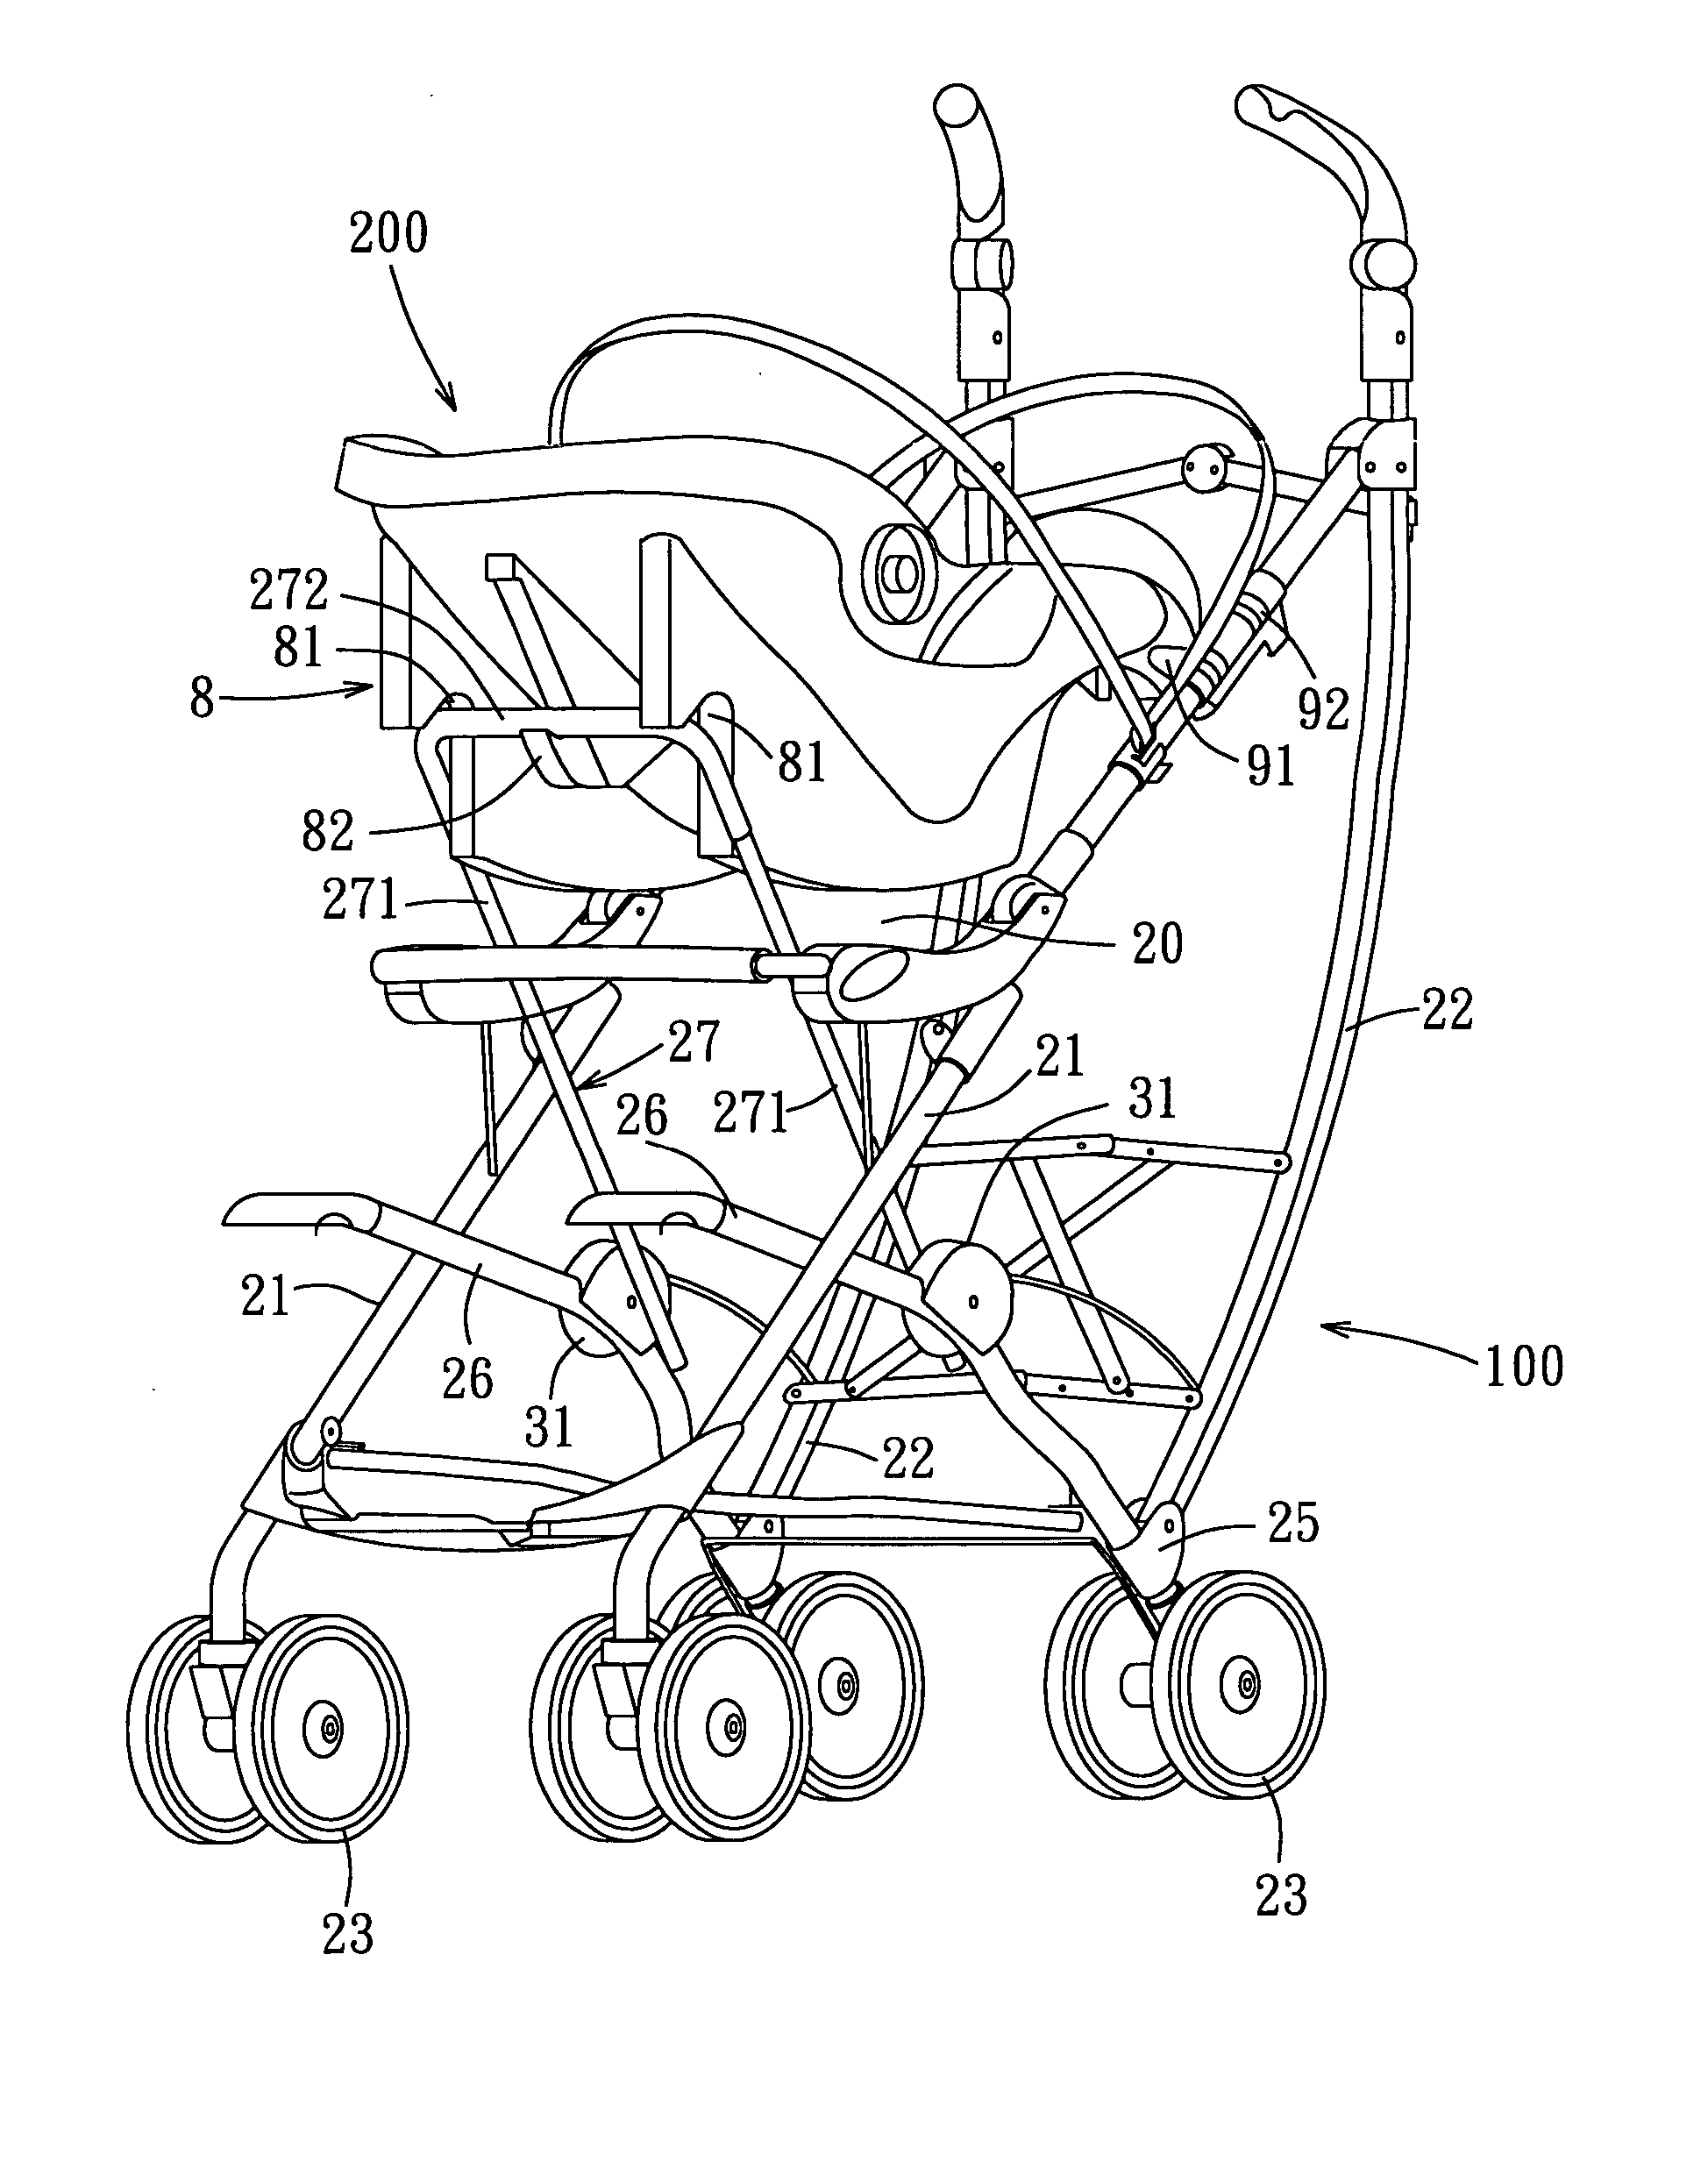 Baby carriage chassis adapted to support a baby's car seat thereon